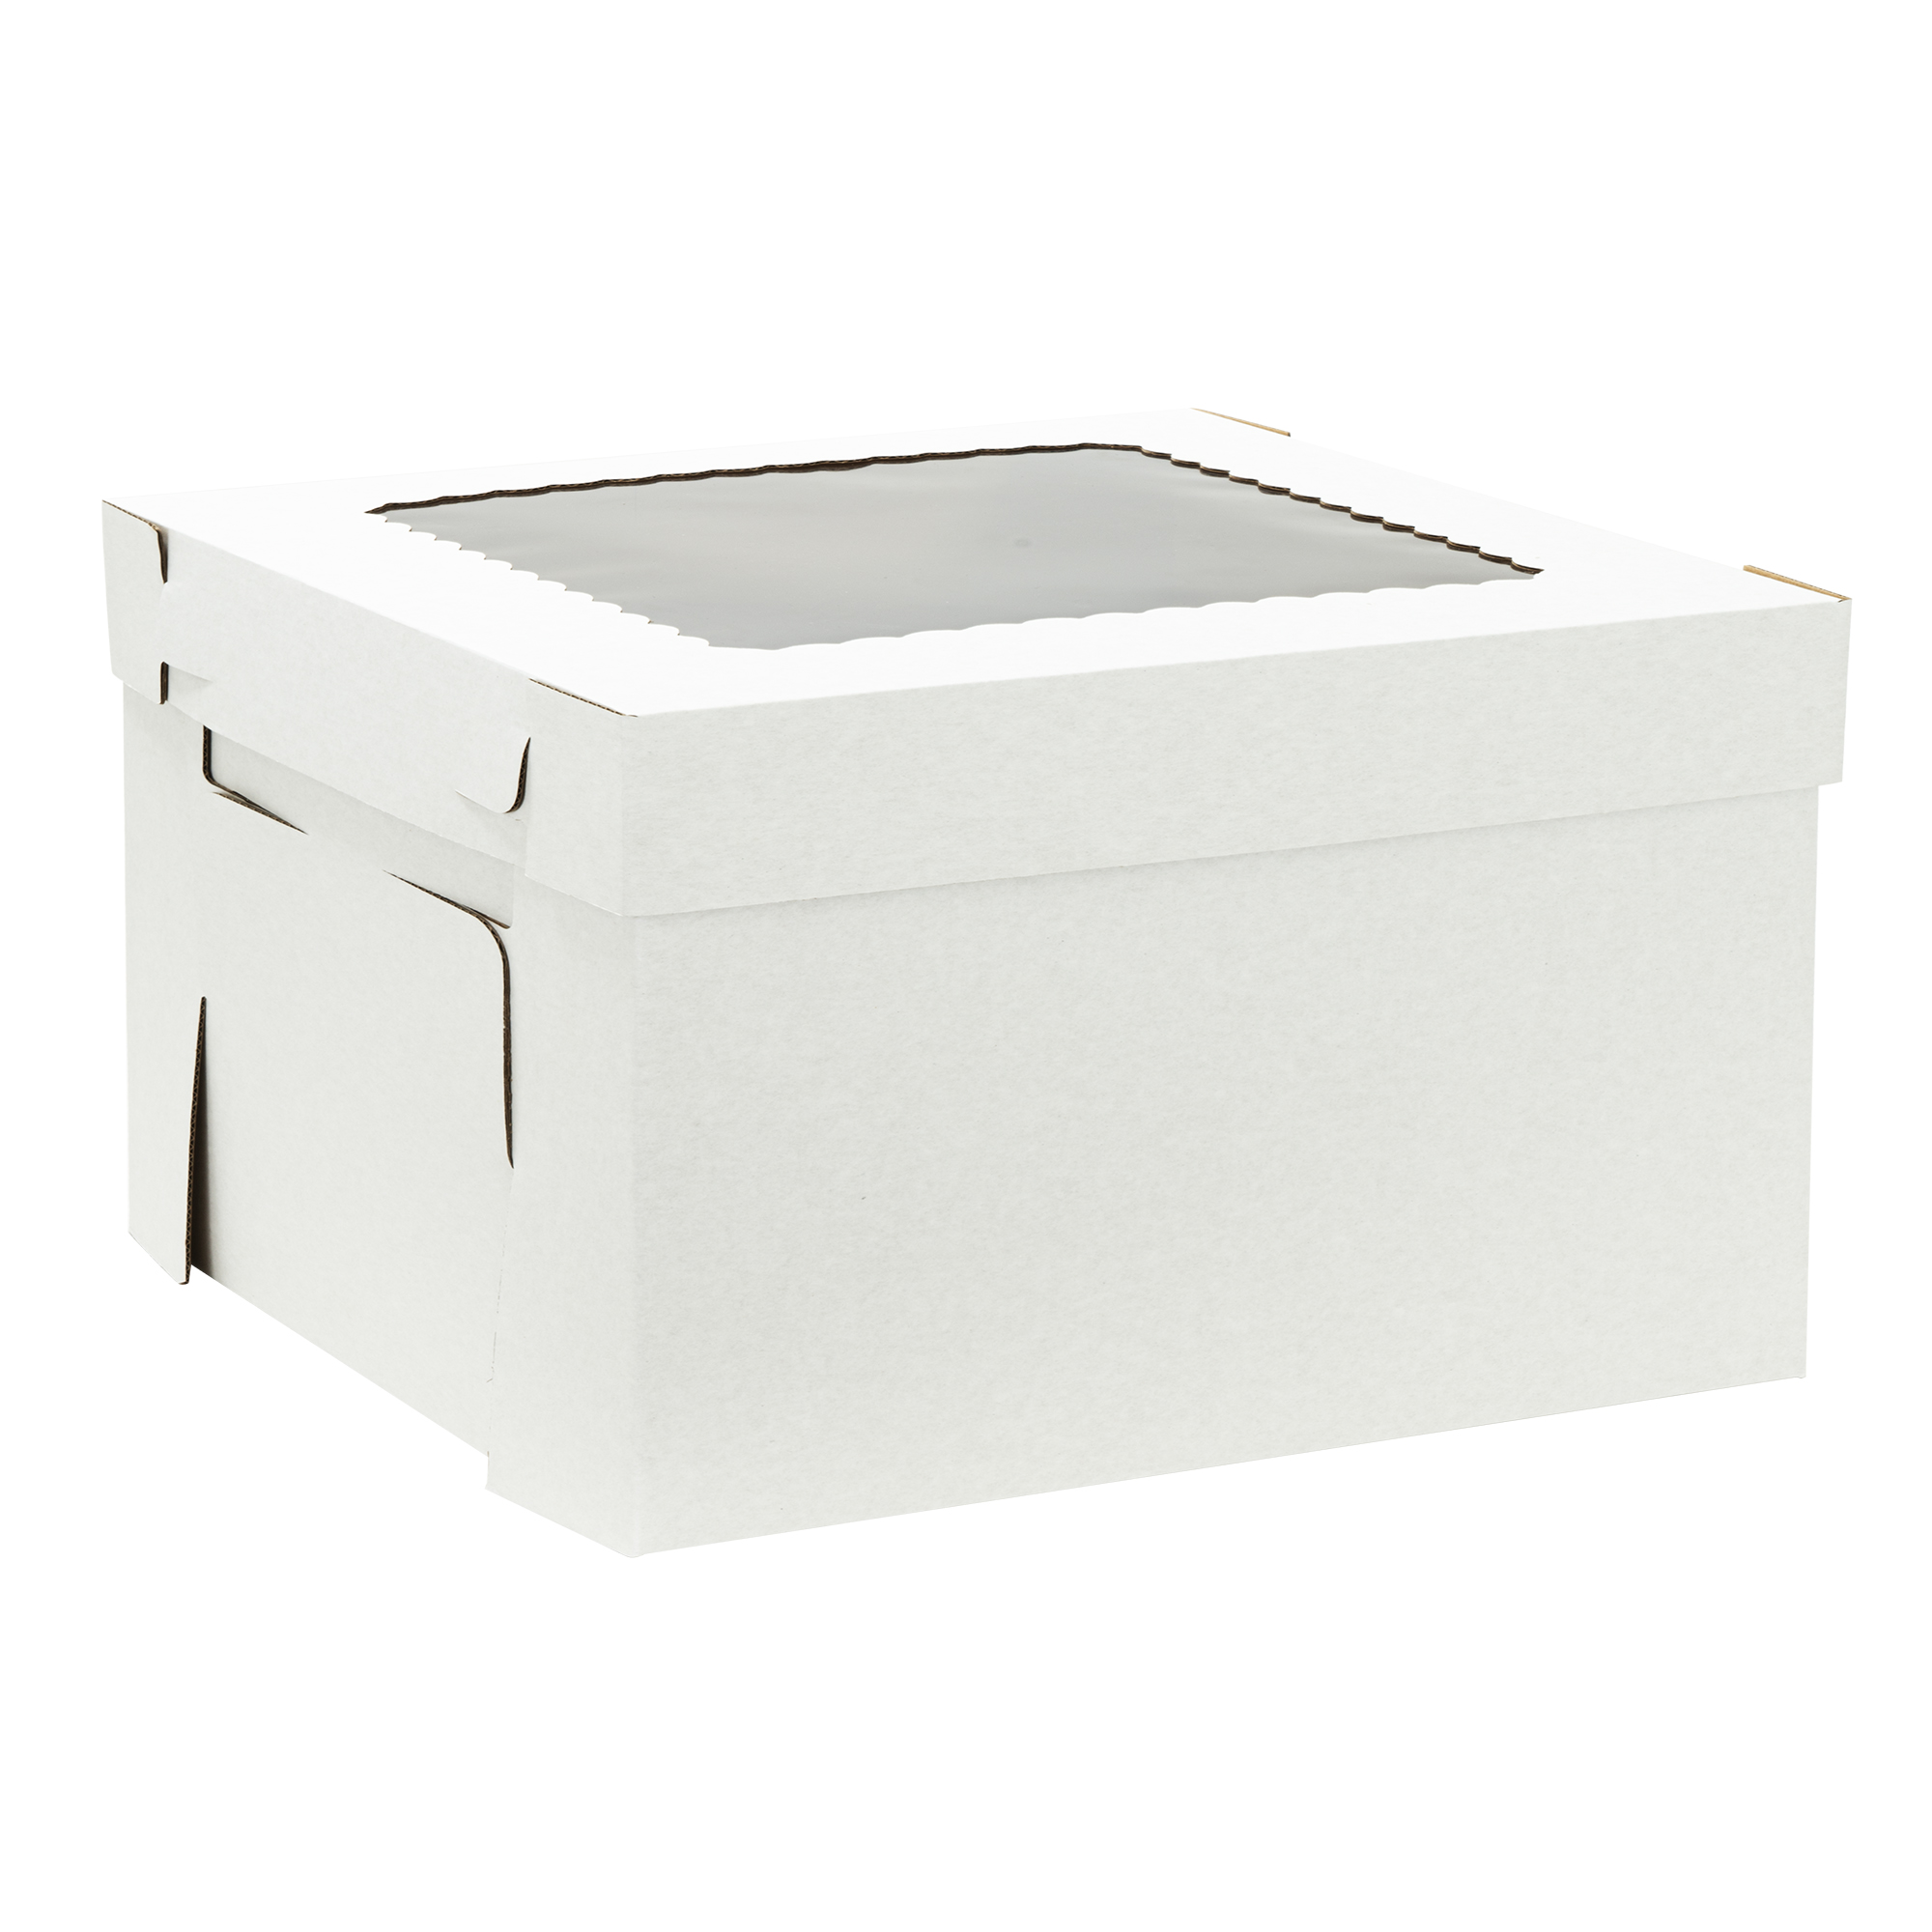 Corrugated 2-Piece Bakery Box With Window Lid 18" 25pc/pack - White